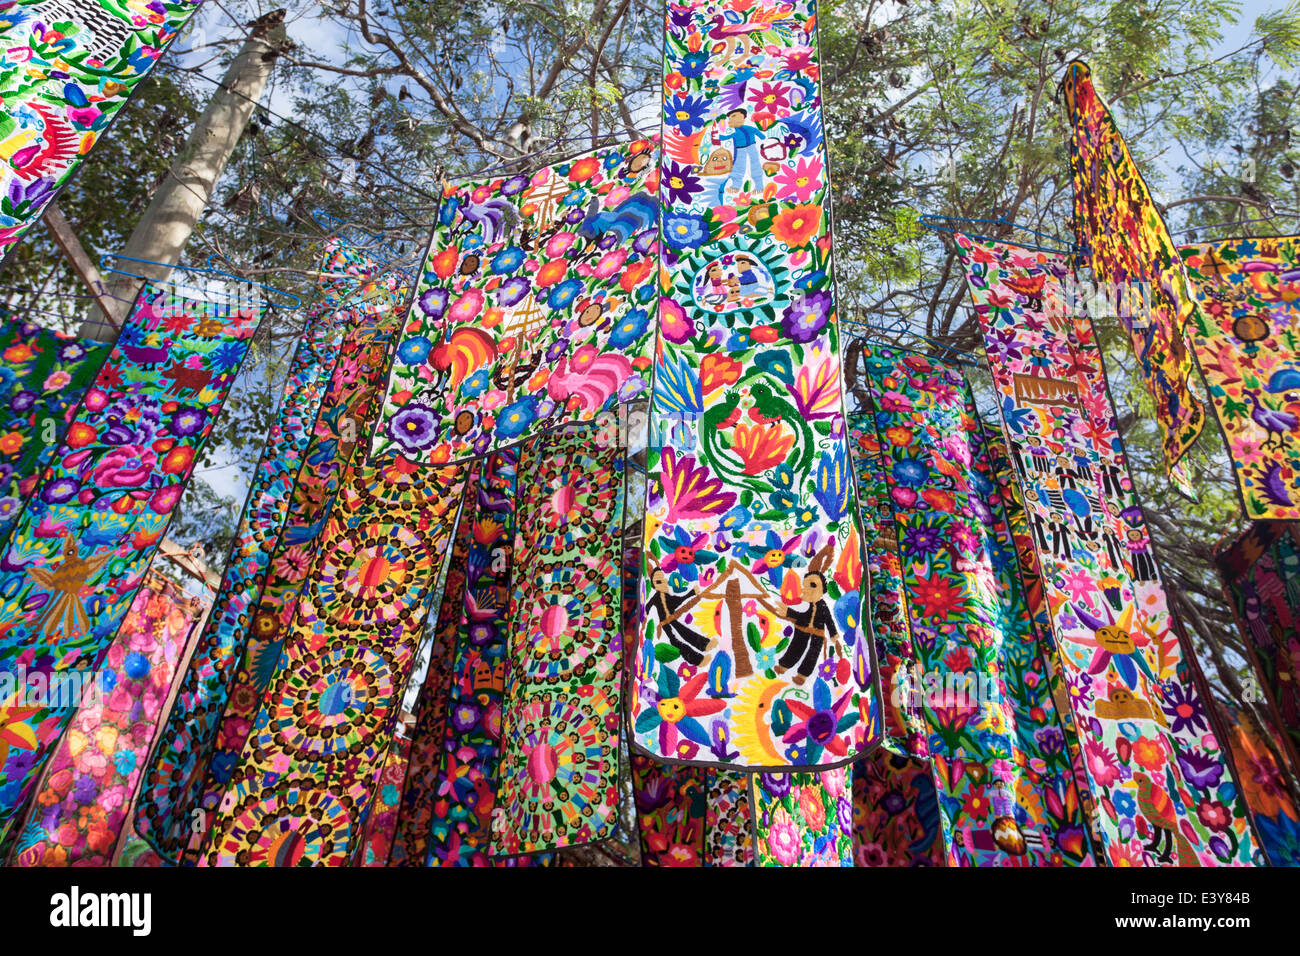 Hand stitched table runners hang from the trees in a Tulum, Mexico market. Stock Photo